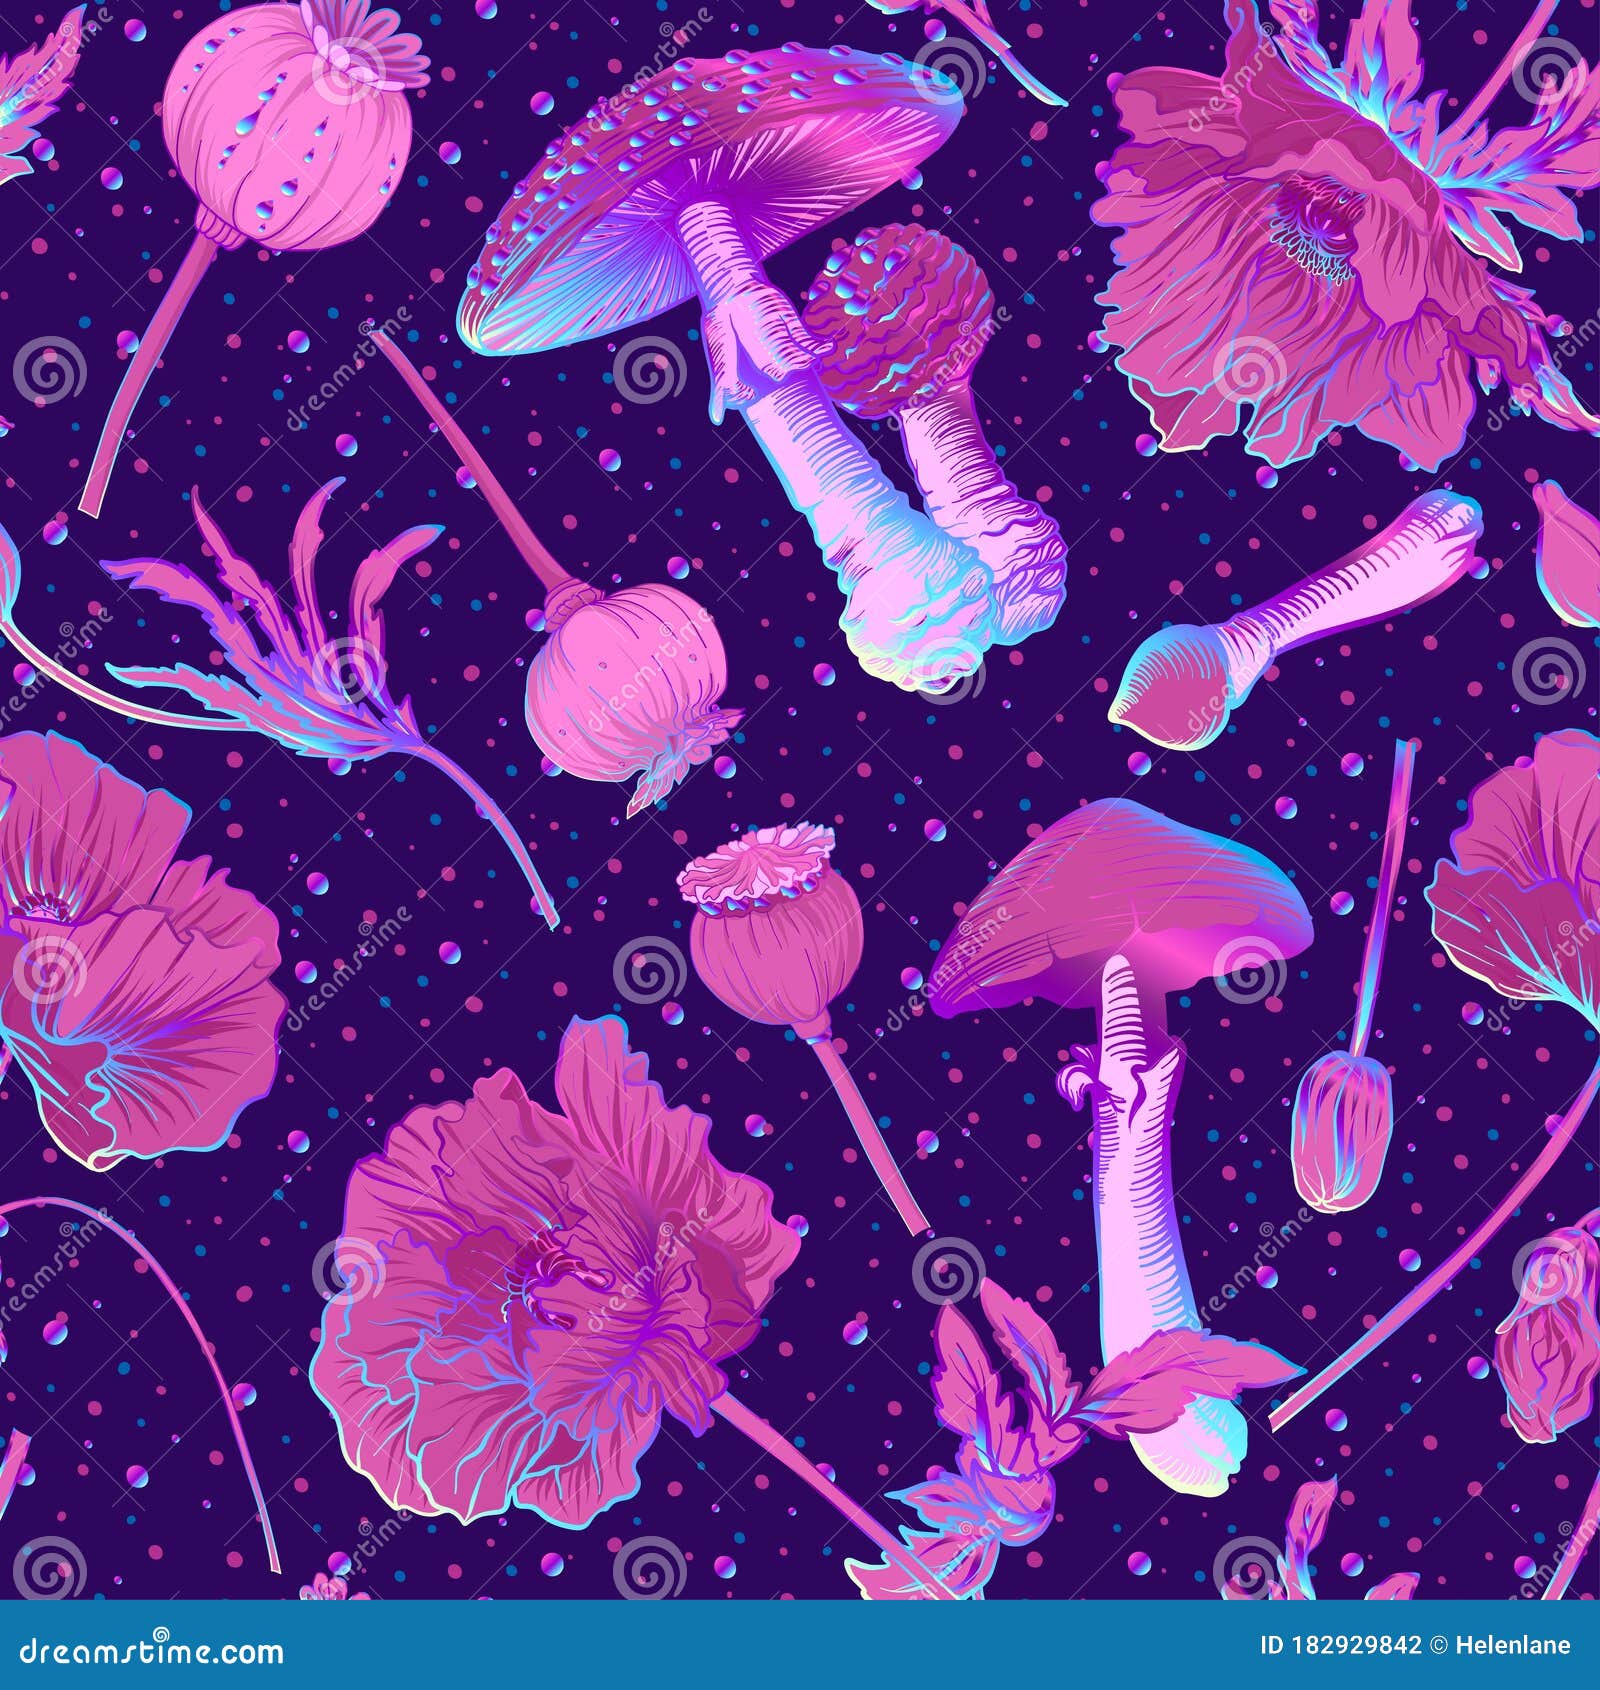 seamless pattern, background with miraculous, hallucinogenic plants